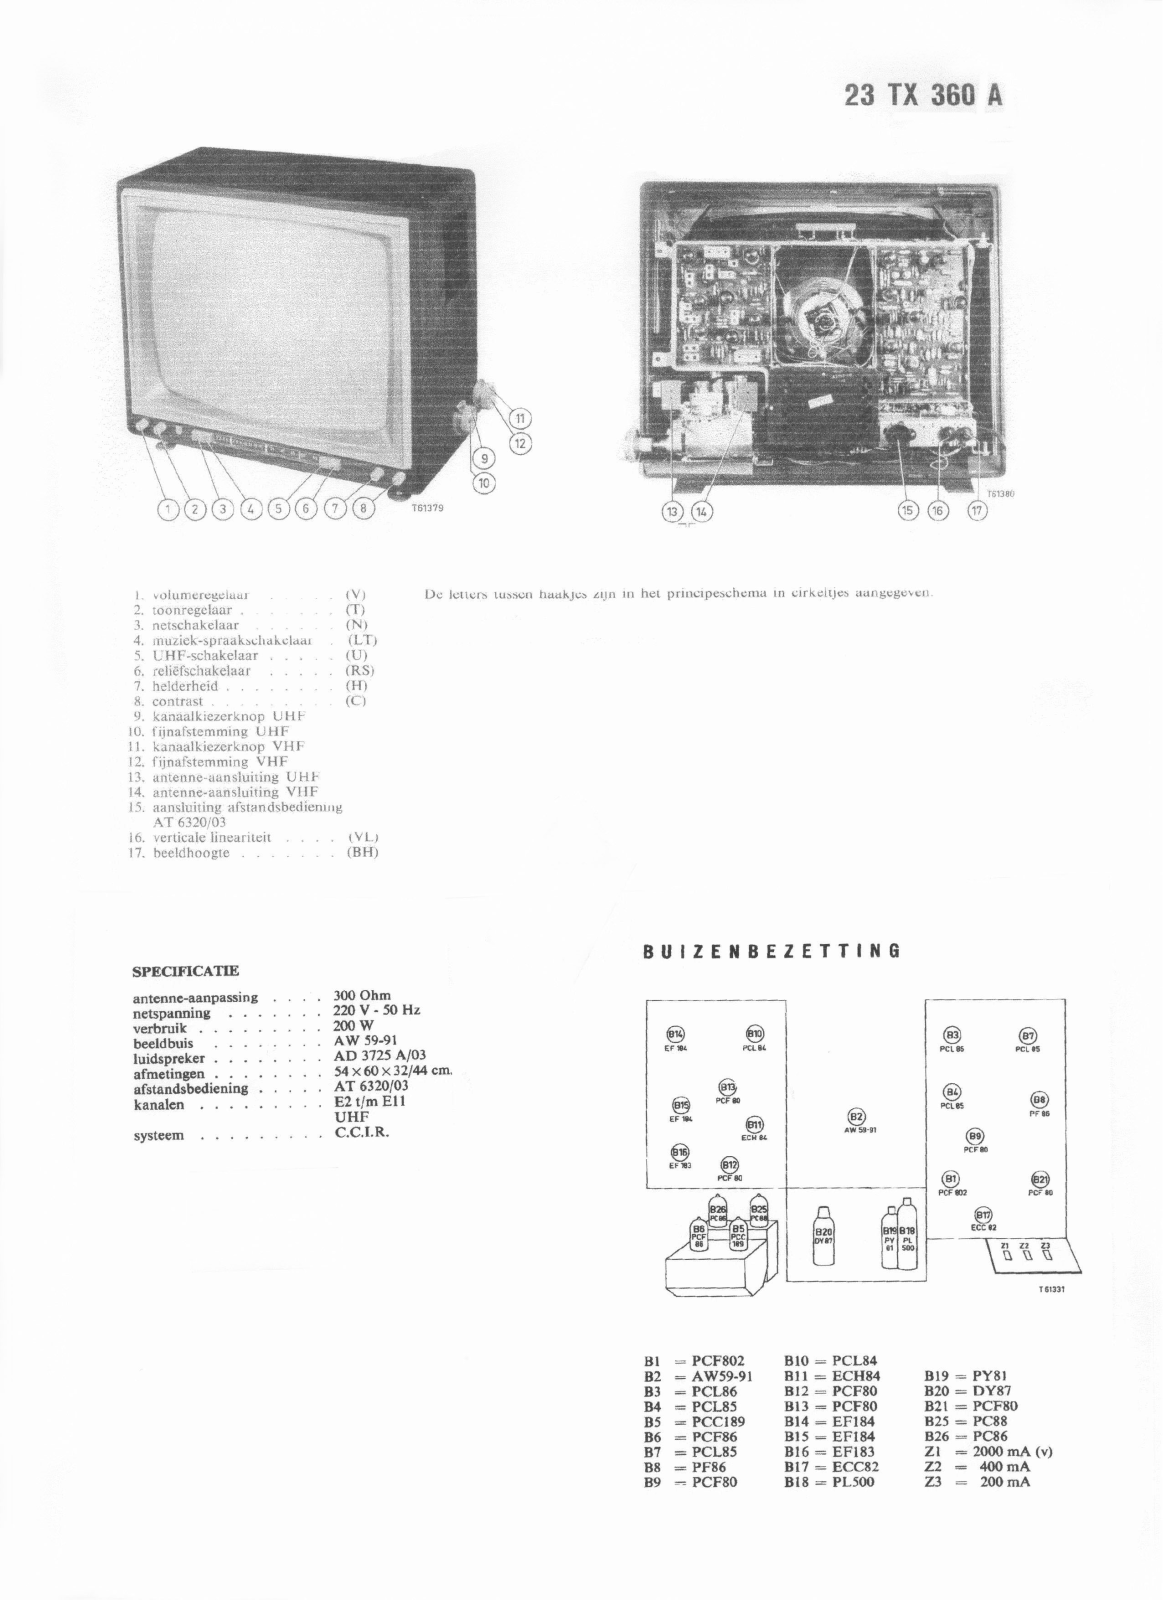 PHILIPS 23tx360a Service Manual